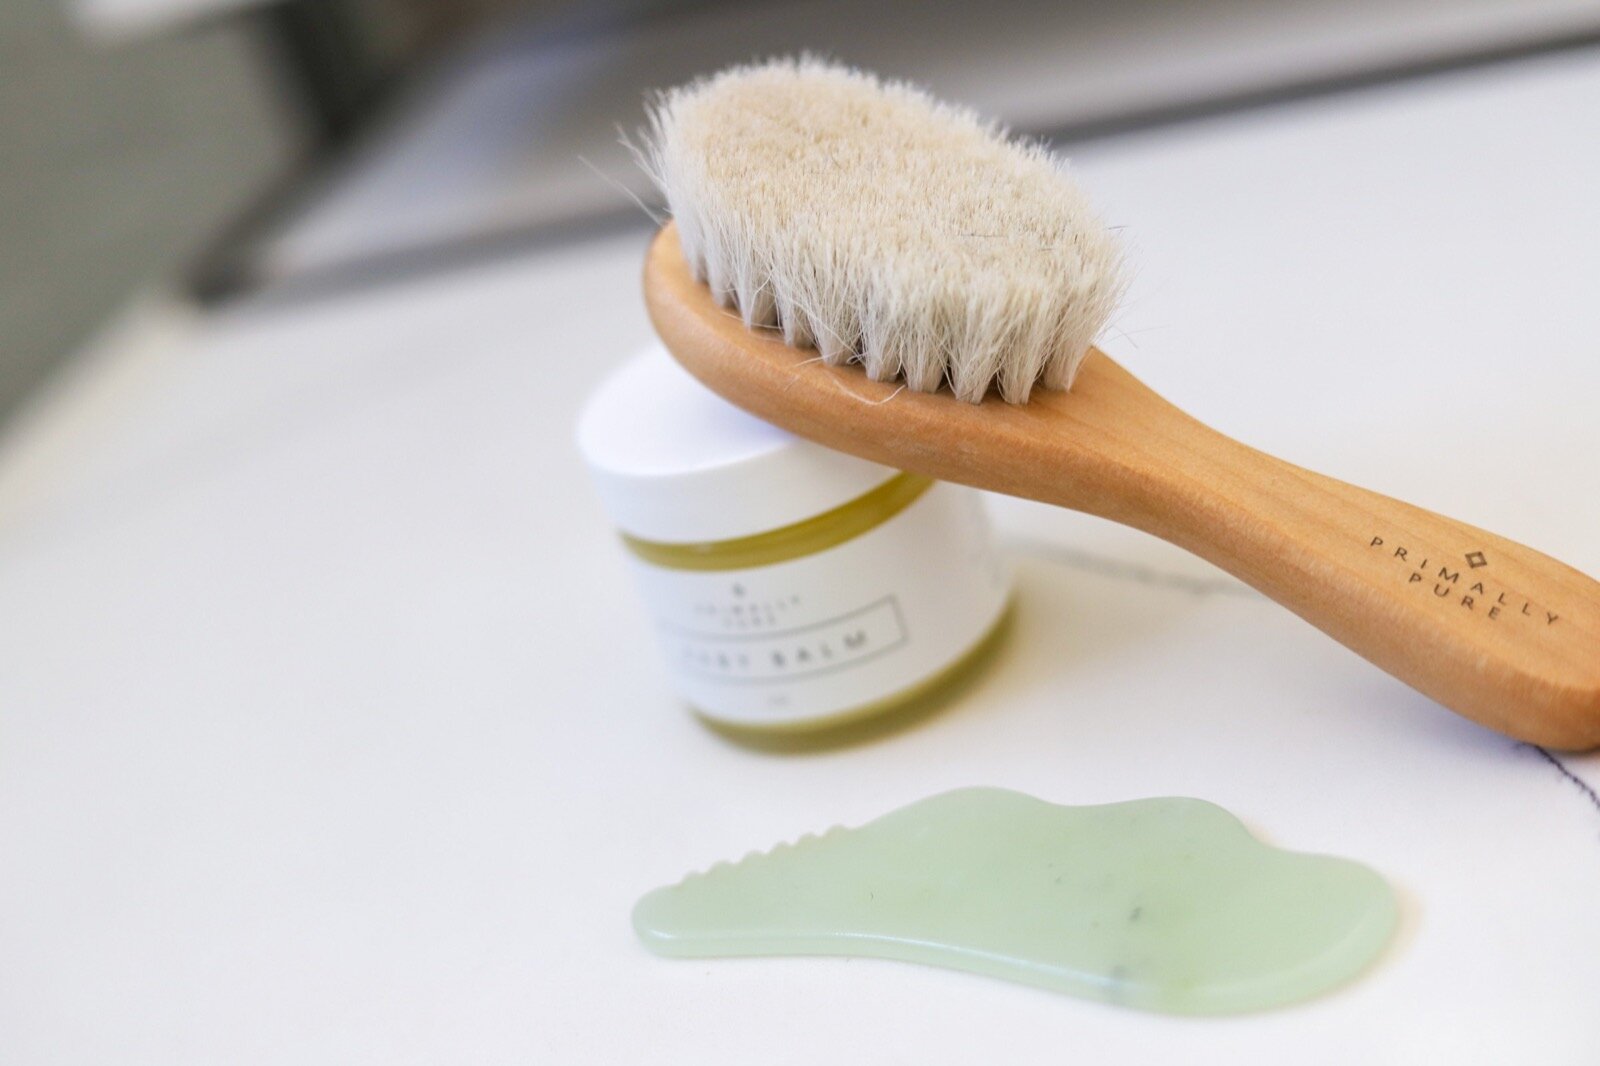 using a facial dry brush in your skincare routine, primally pure discount code, lments of style, la blogger, dry brushing benefits, primally pure facial dry bush, easy skincare routine, pregnancy safe skincare tools